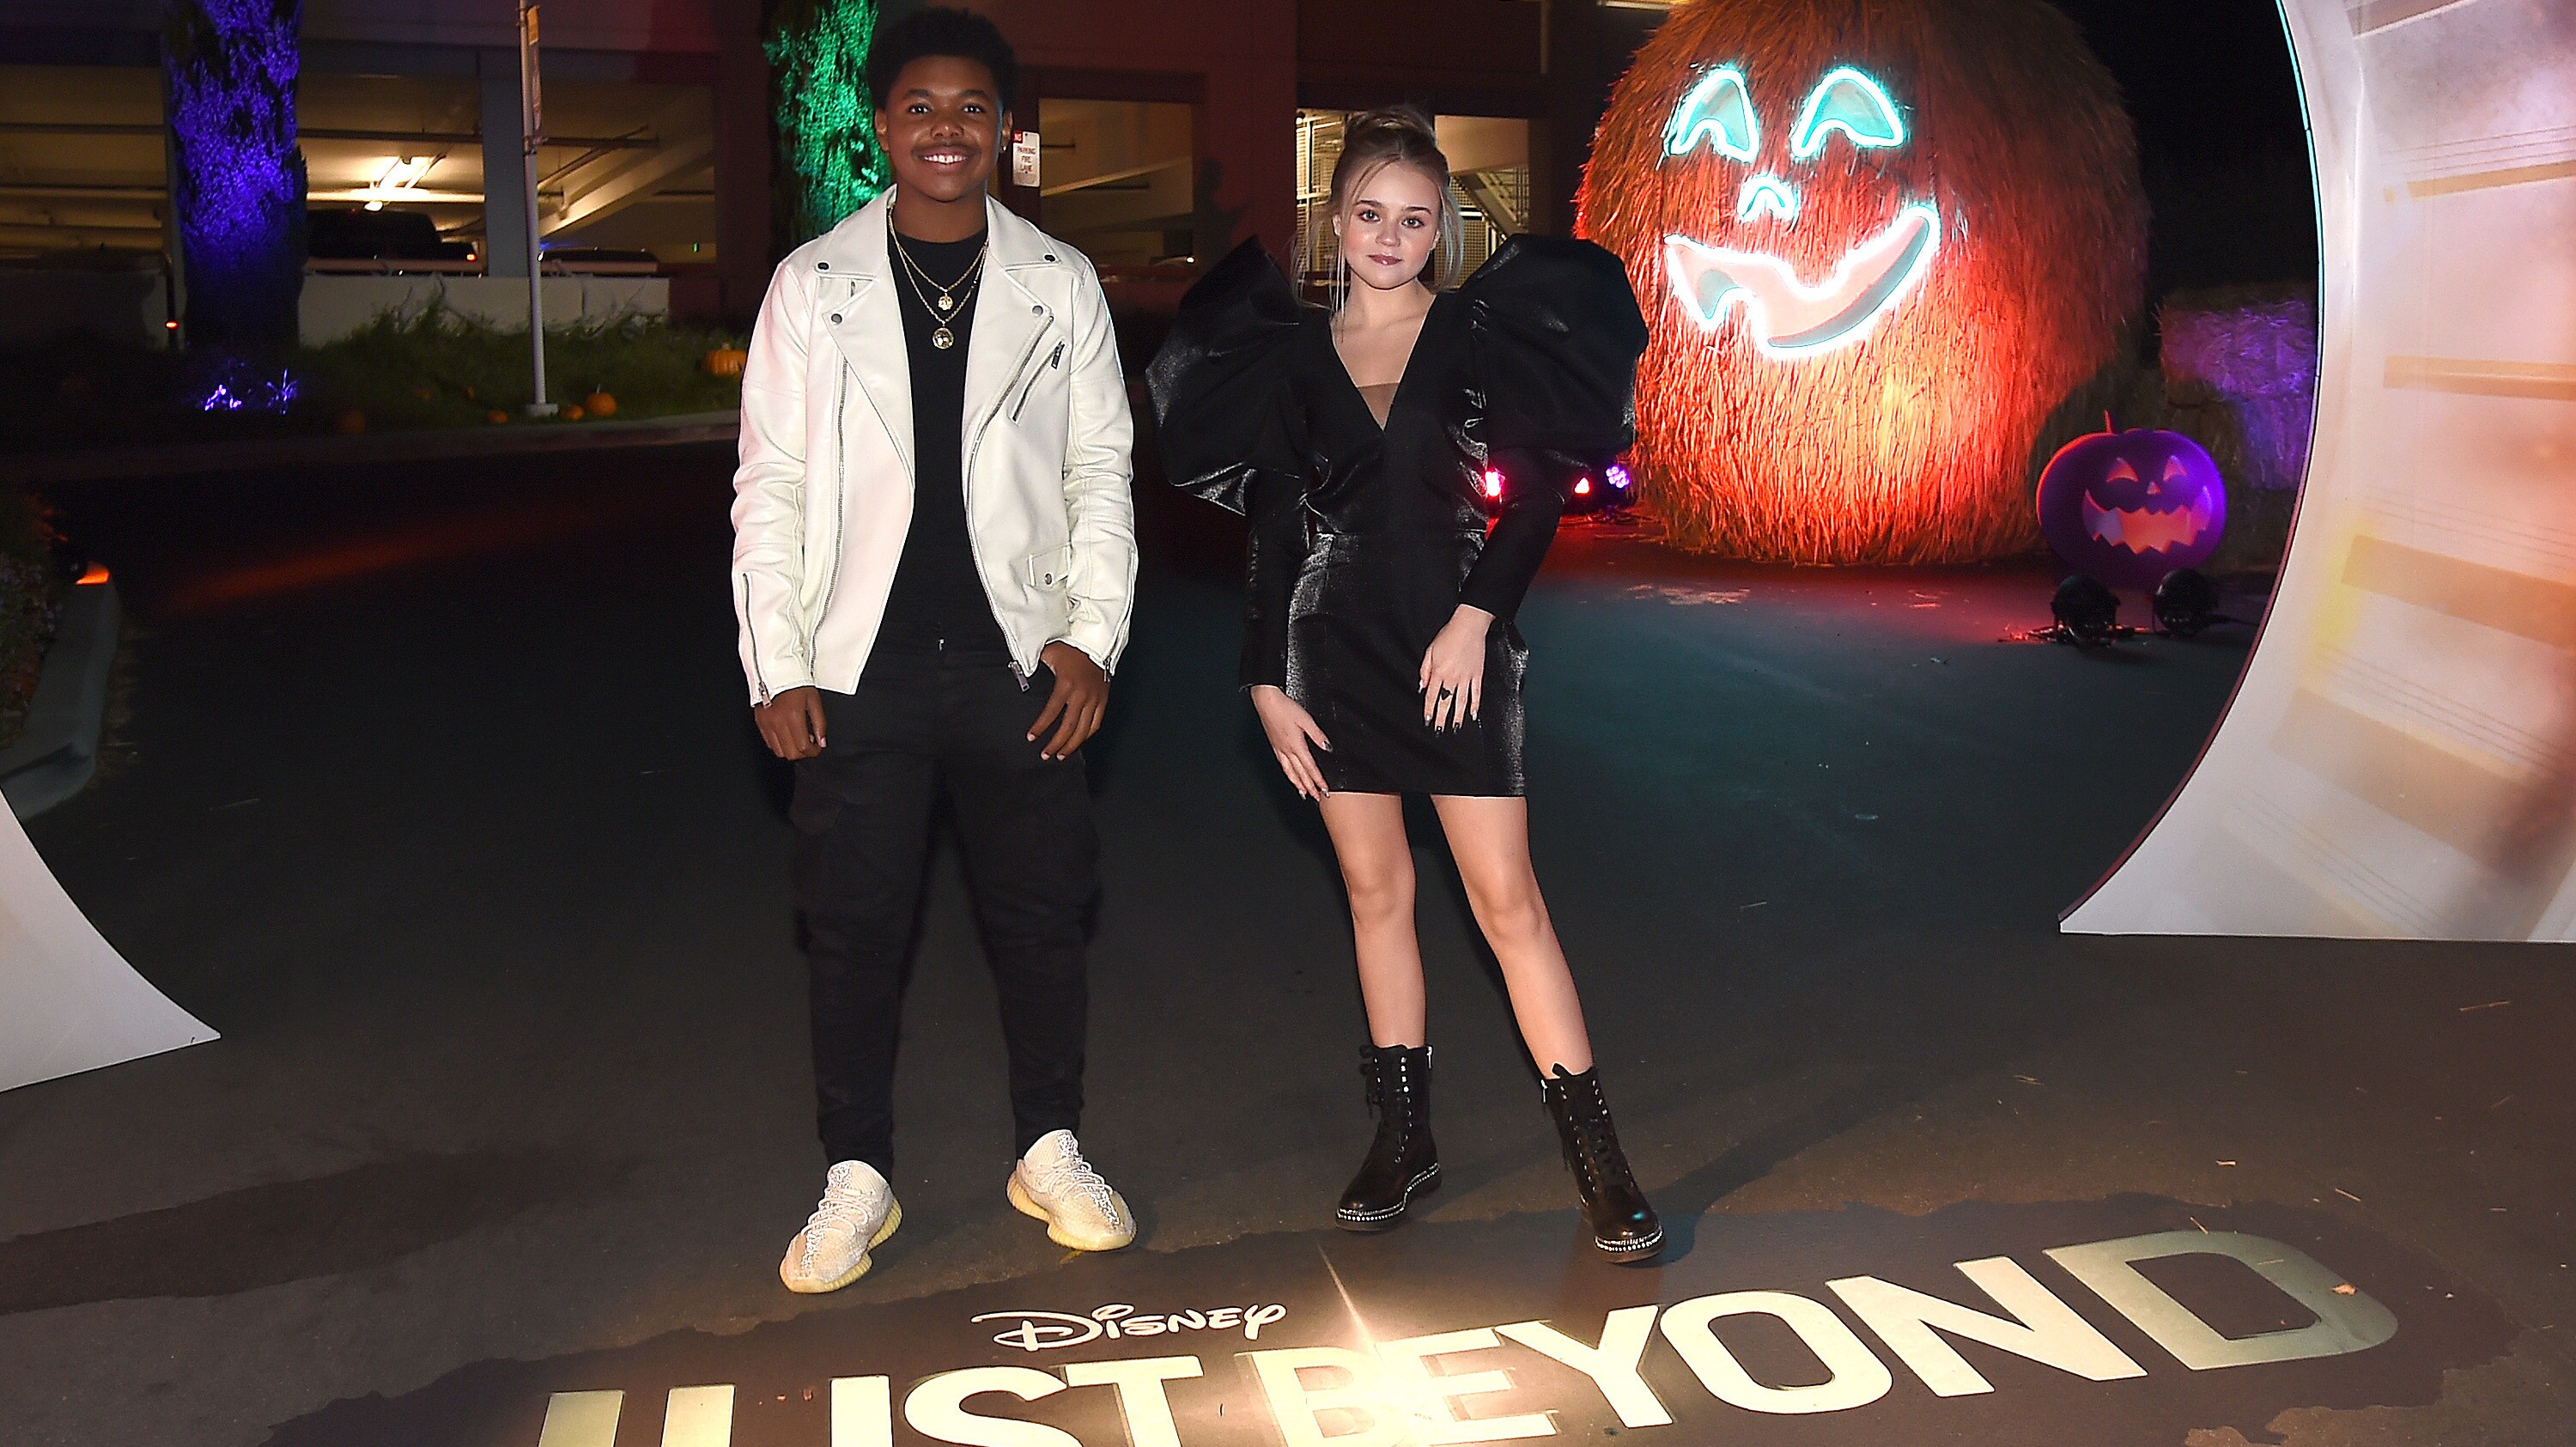 JUST BEYOND - Stars of the R.L. Stine inspired Disney+ Original series “Just Beyond” attended the Drive-In Premiere Event at West Los Angeles College, Tuesday, October 12. All episodes of “Just Beyond” are available to stream Wednesday, October 13 on Disney+. (Disney/Frank Micelotta/PictureGroup) CEDRIC JOE, MEGAN STOTT